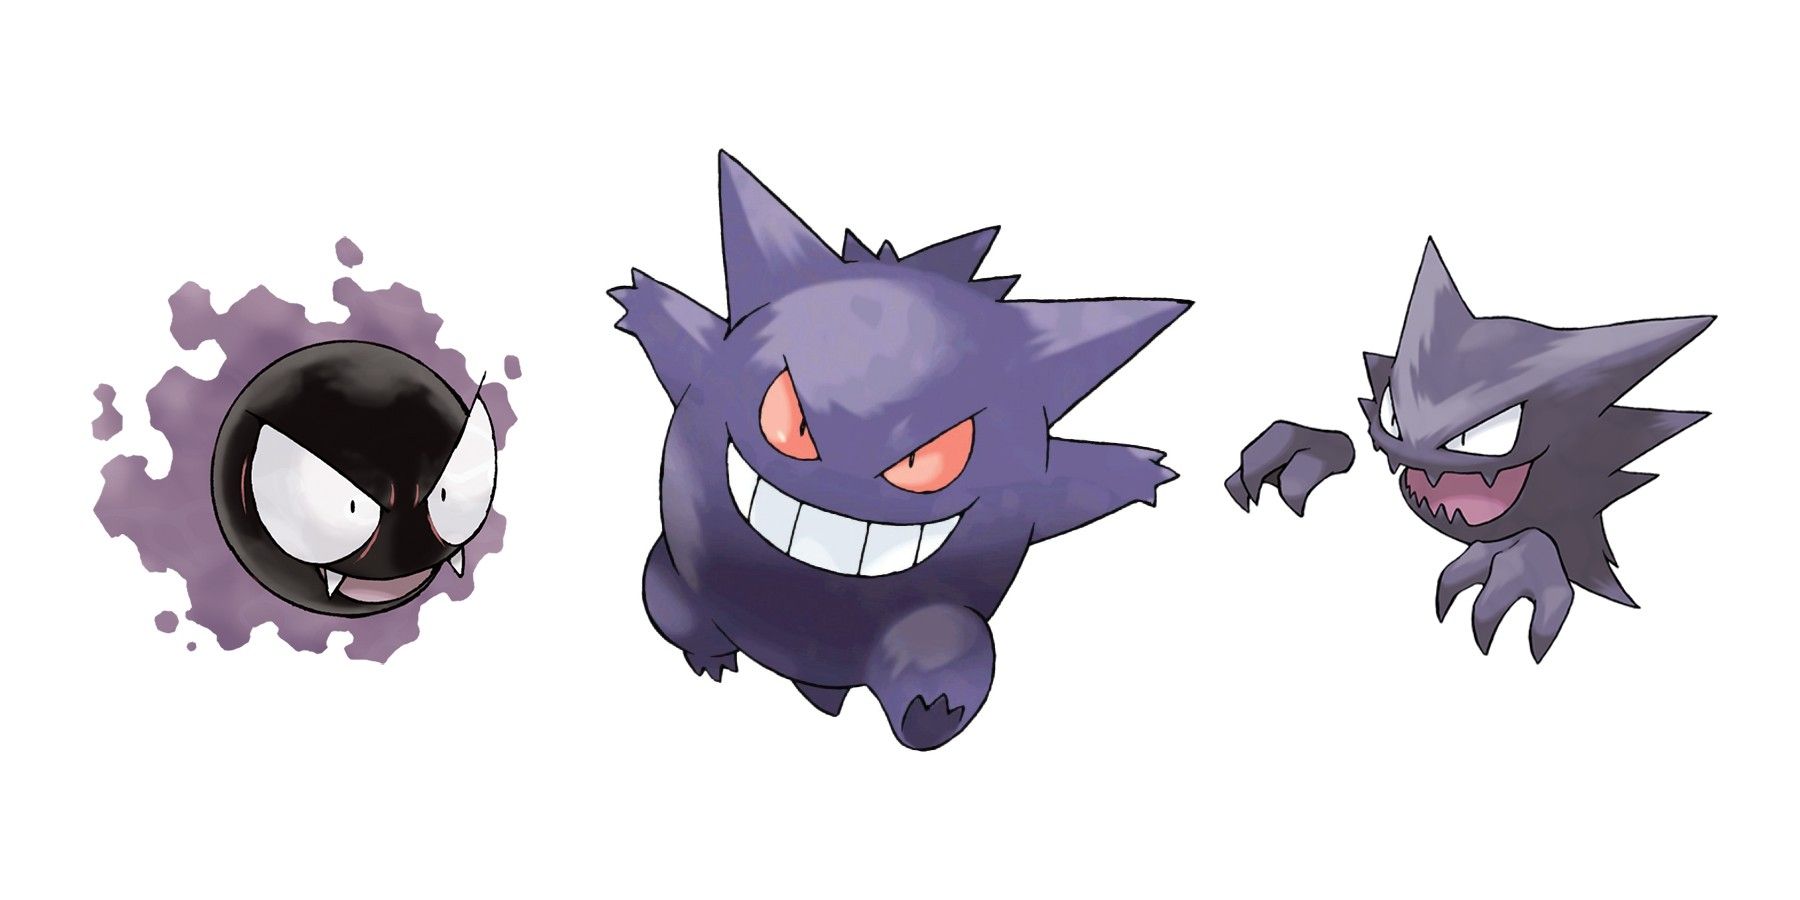 Incredible Pokemon Fan Art Features Gastly, Haunter, and Gengar